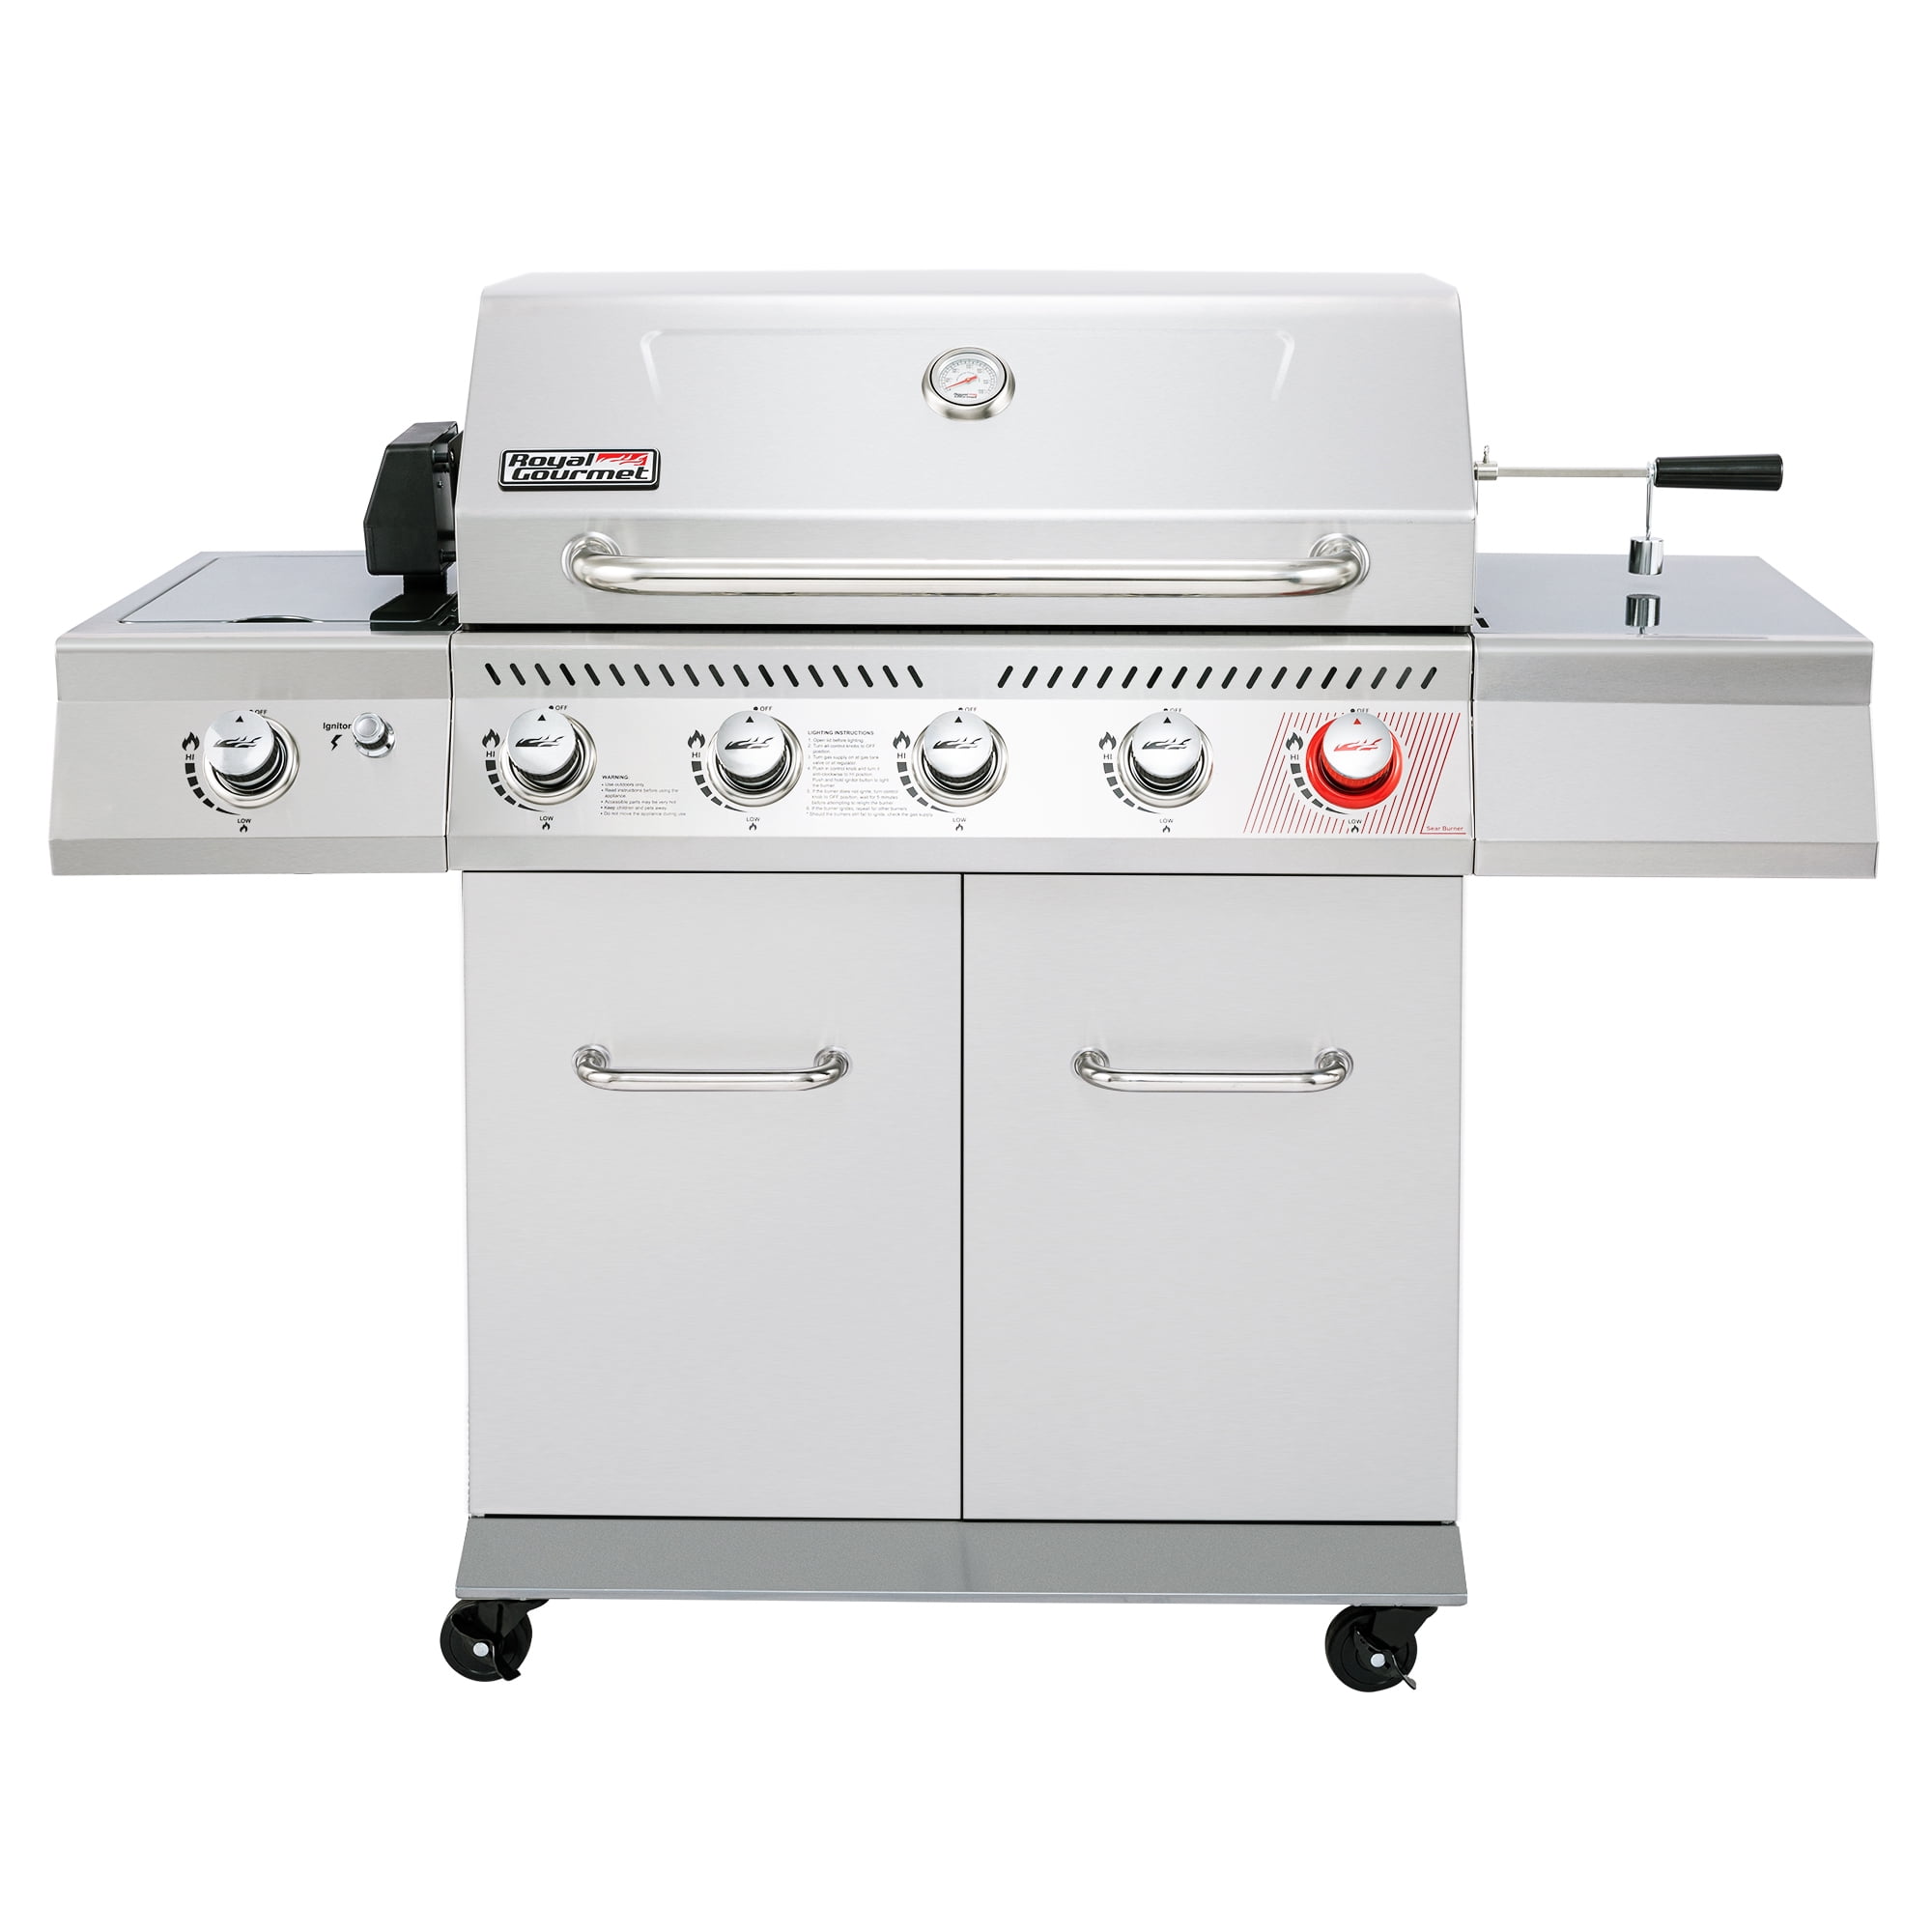 Royal Gourmet GA5404S Stainless Steel 5-Burner Gas Grill with Rotisserie Kit, Sear Burner, and Side 64,000 BTU Cabinet Style Gas Grill, Silver - Walmart.com